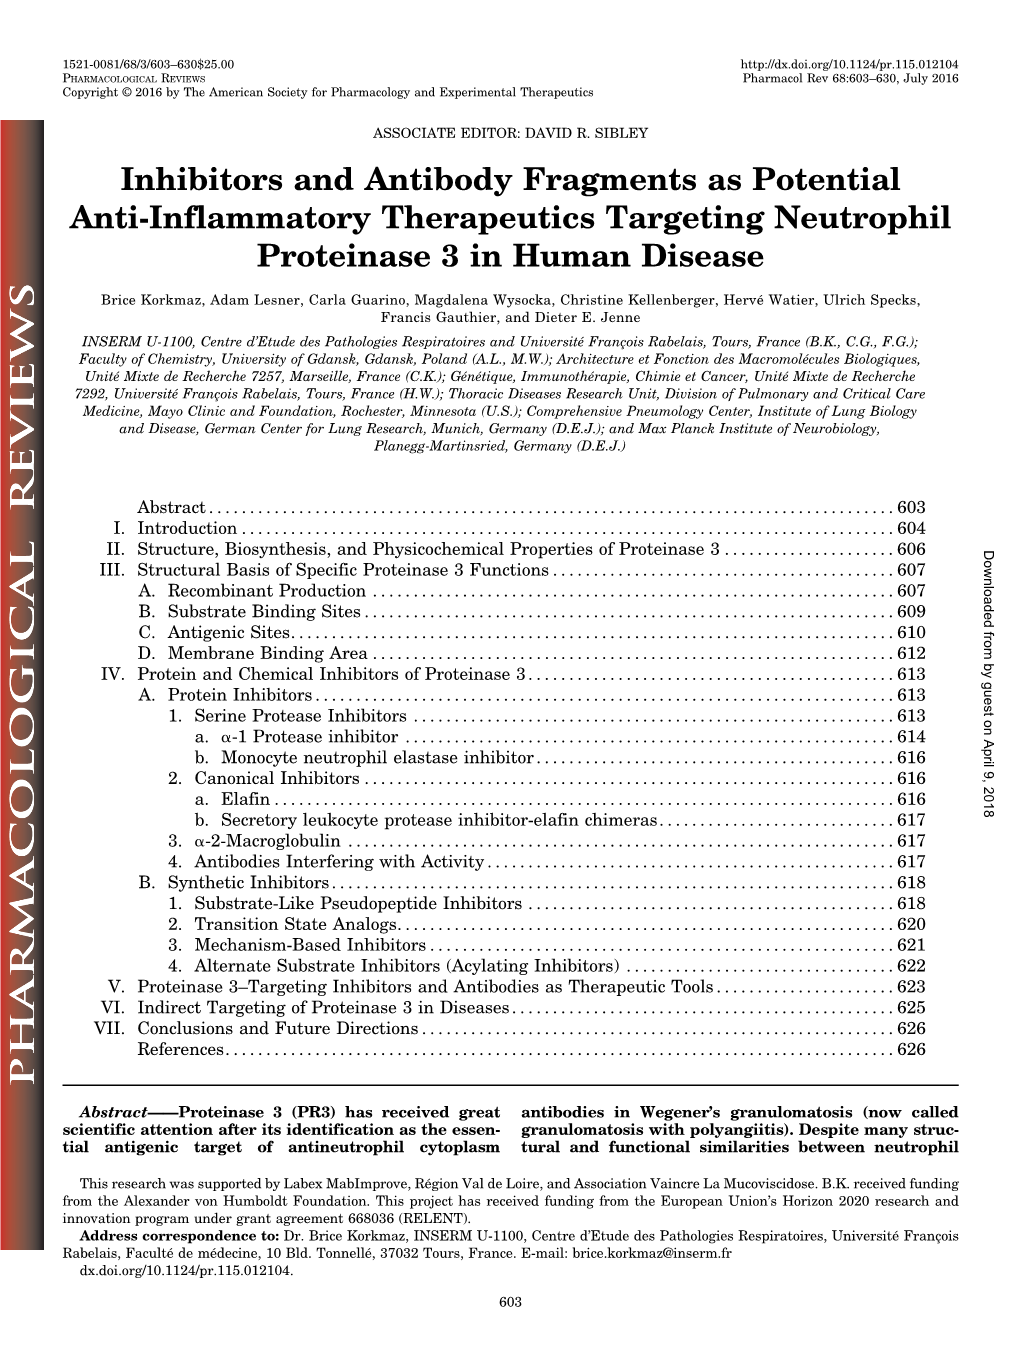 Inhibitors and Antibody Fragments As Potential Anti-Inflammatory Therapeutics Targeting Neutrophil Proteinase 3 in Human Disease